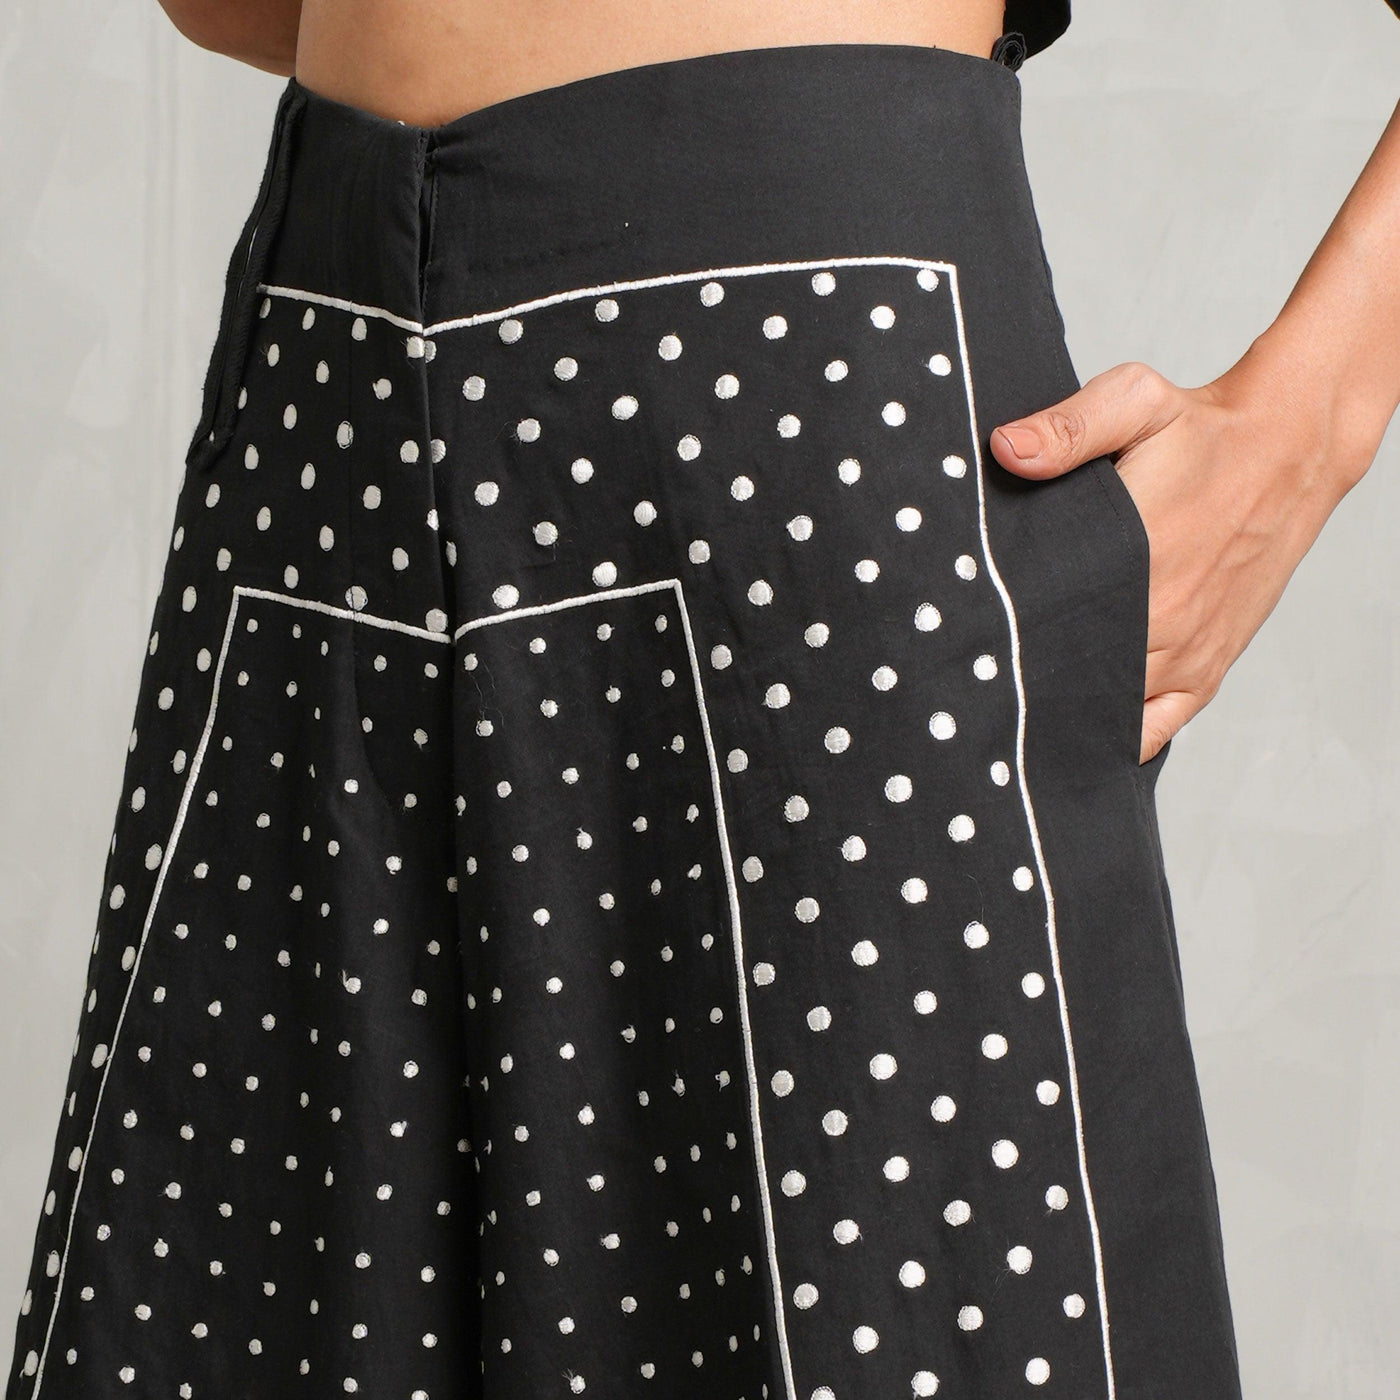 Leh Studios A-line Cropped Pants  feature a cropped hem, a wide-legged silhouette, a high waist, side pockets, and a zip and button closure.